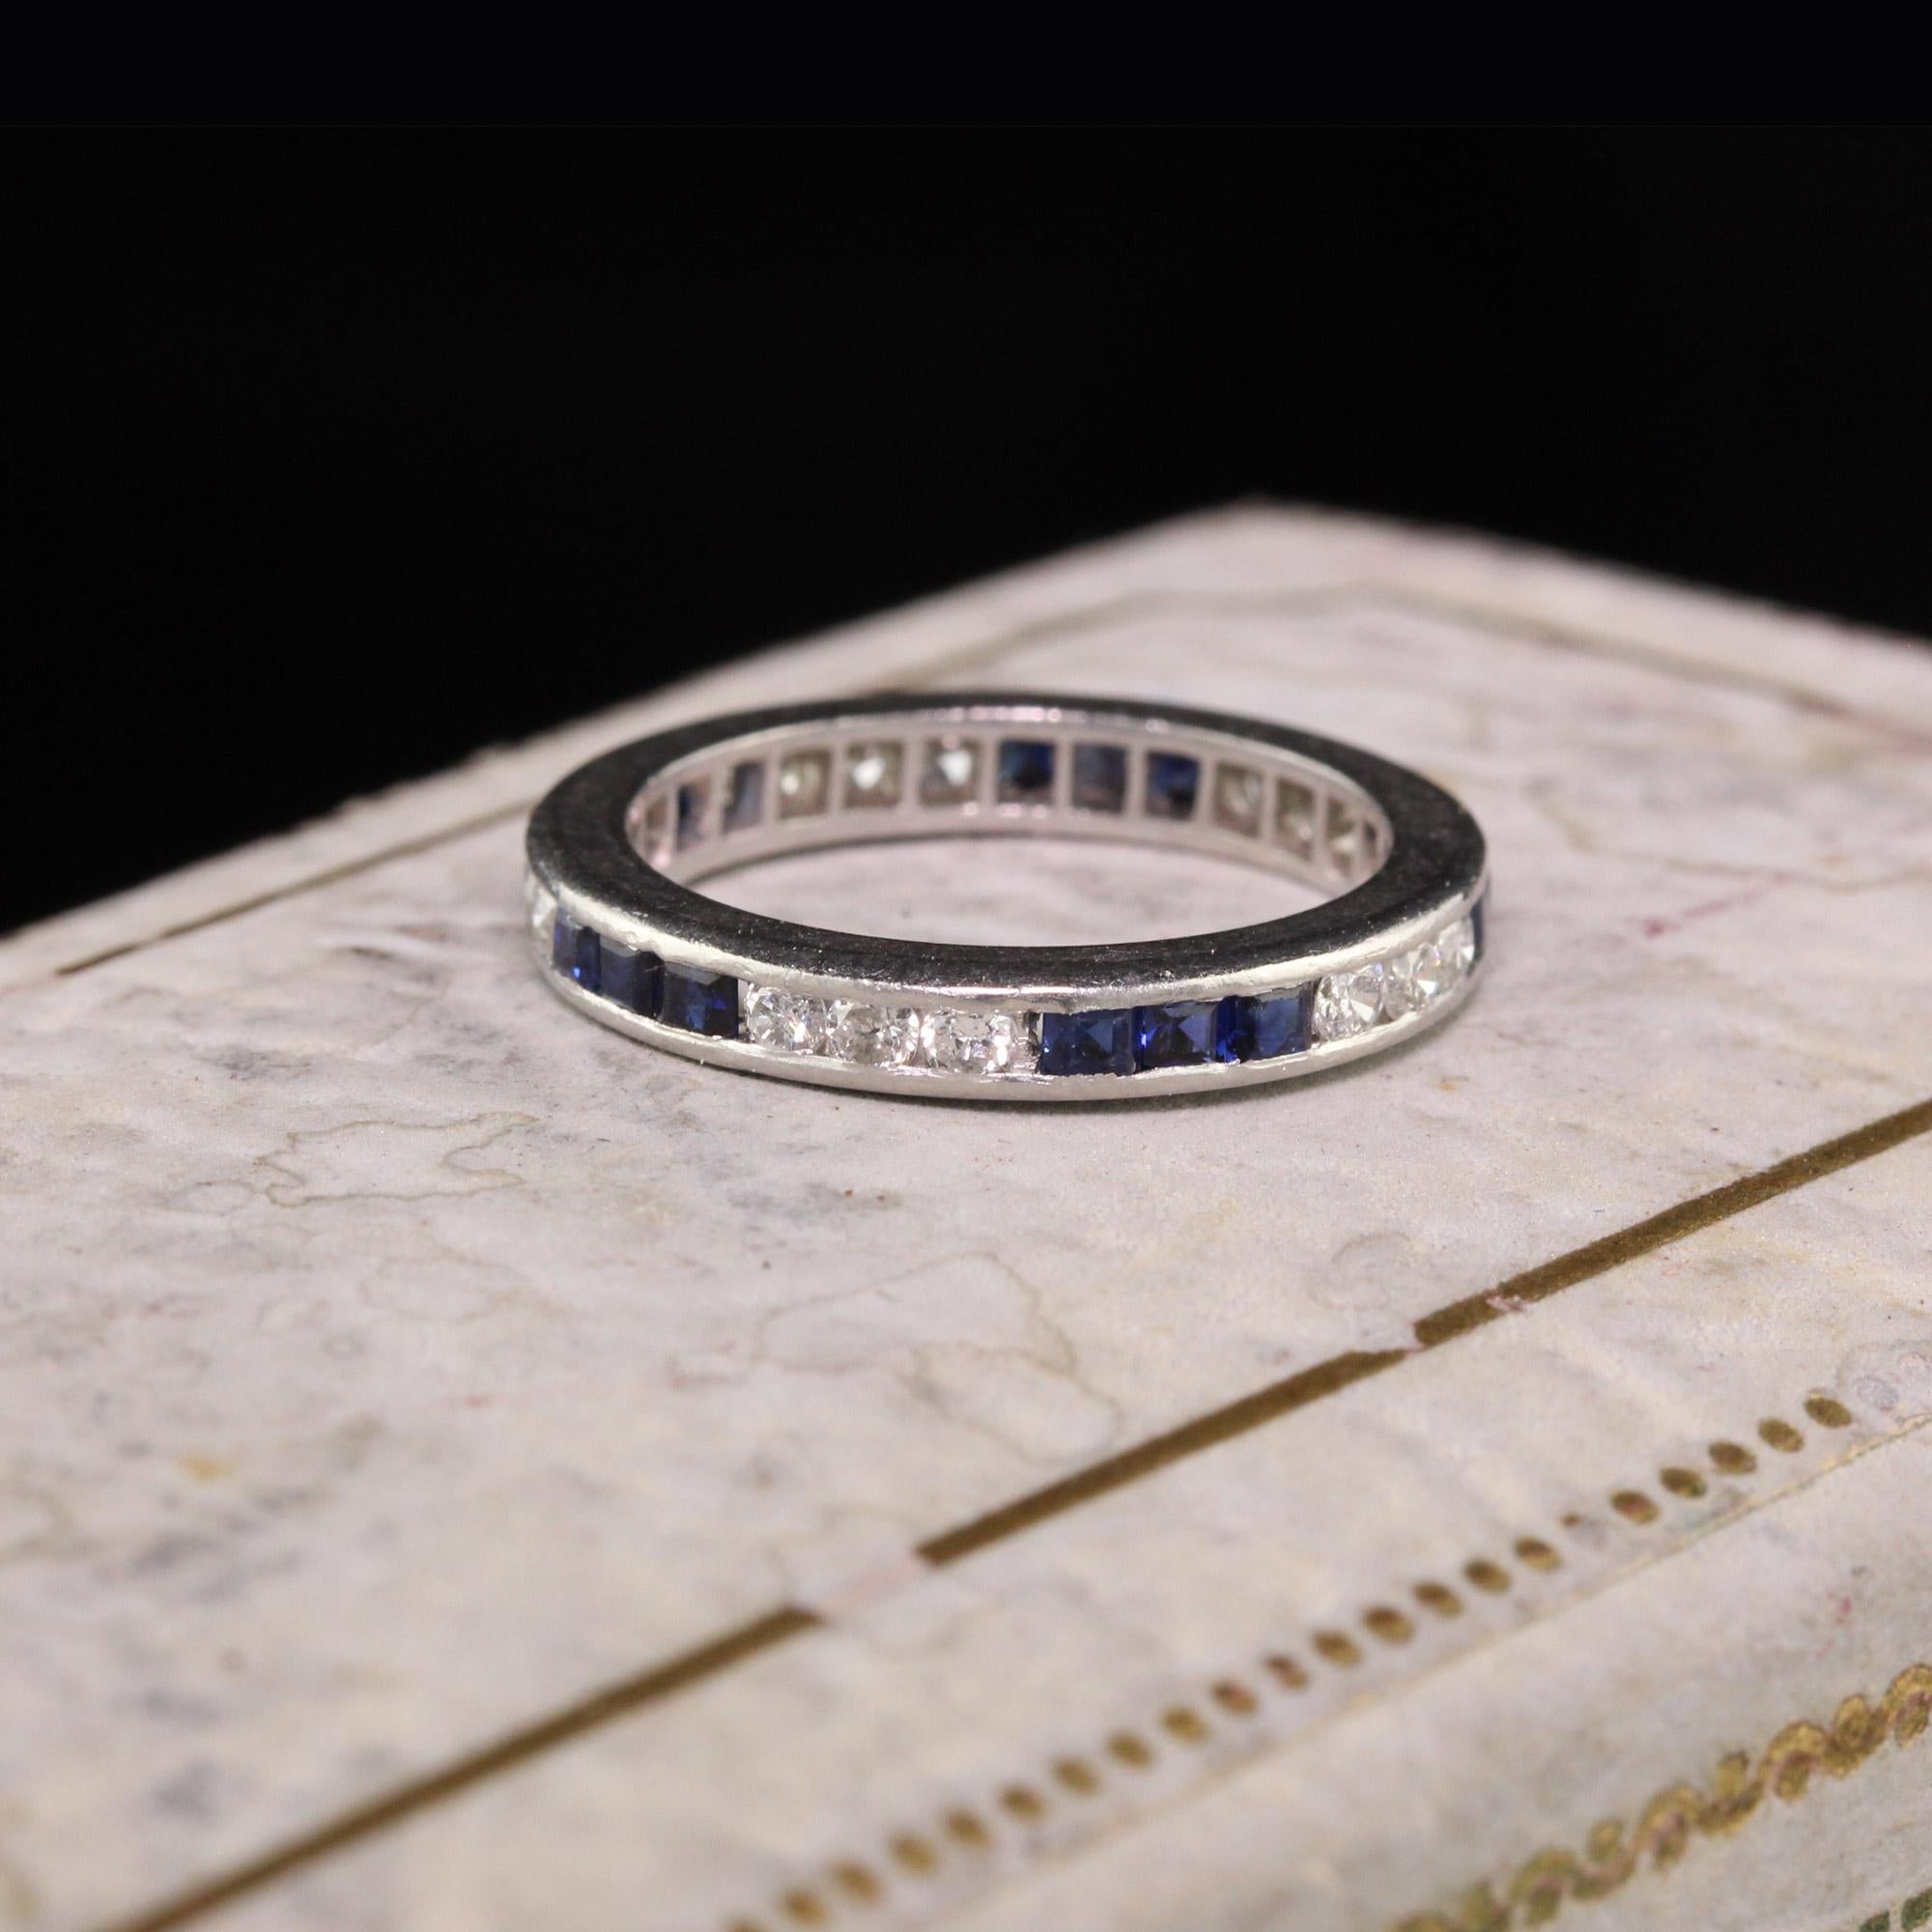 Gorgeous antique platinum eternity band with diamonds and sapphires. One sapphire on the band is chipped. 

Item #R0511

Metal: Platinum

Weight: 3.2 Grams

Total Diamond Weight: Approximately 0.50 cts

Diamond Color: H

Diamond Clarity: VS1 - VS2